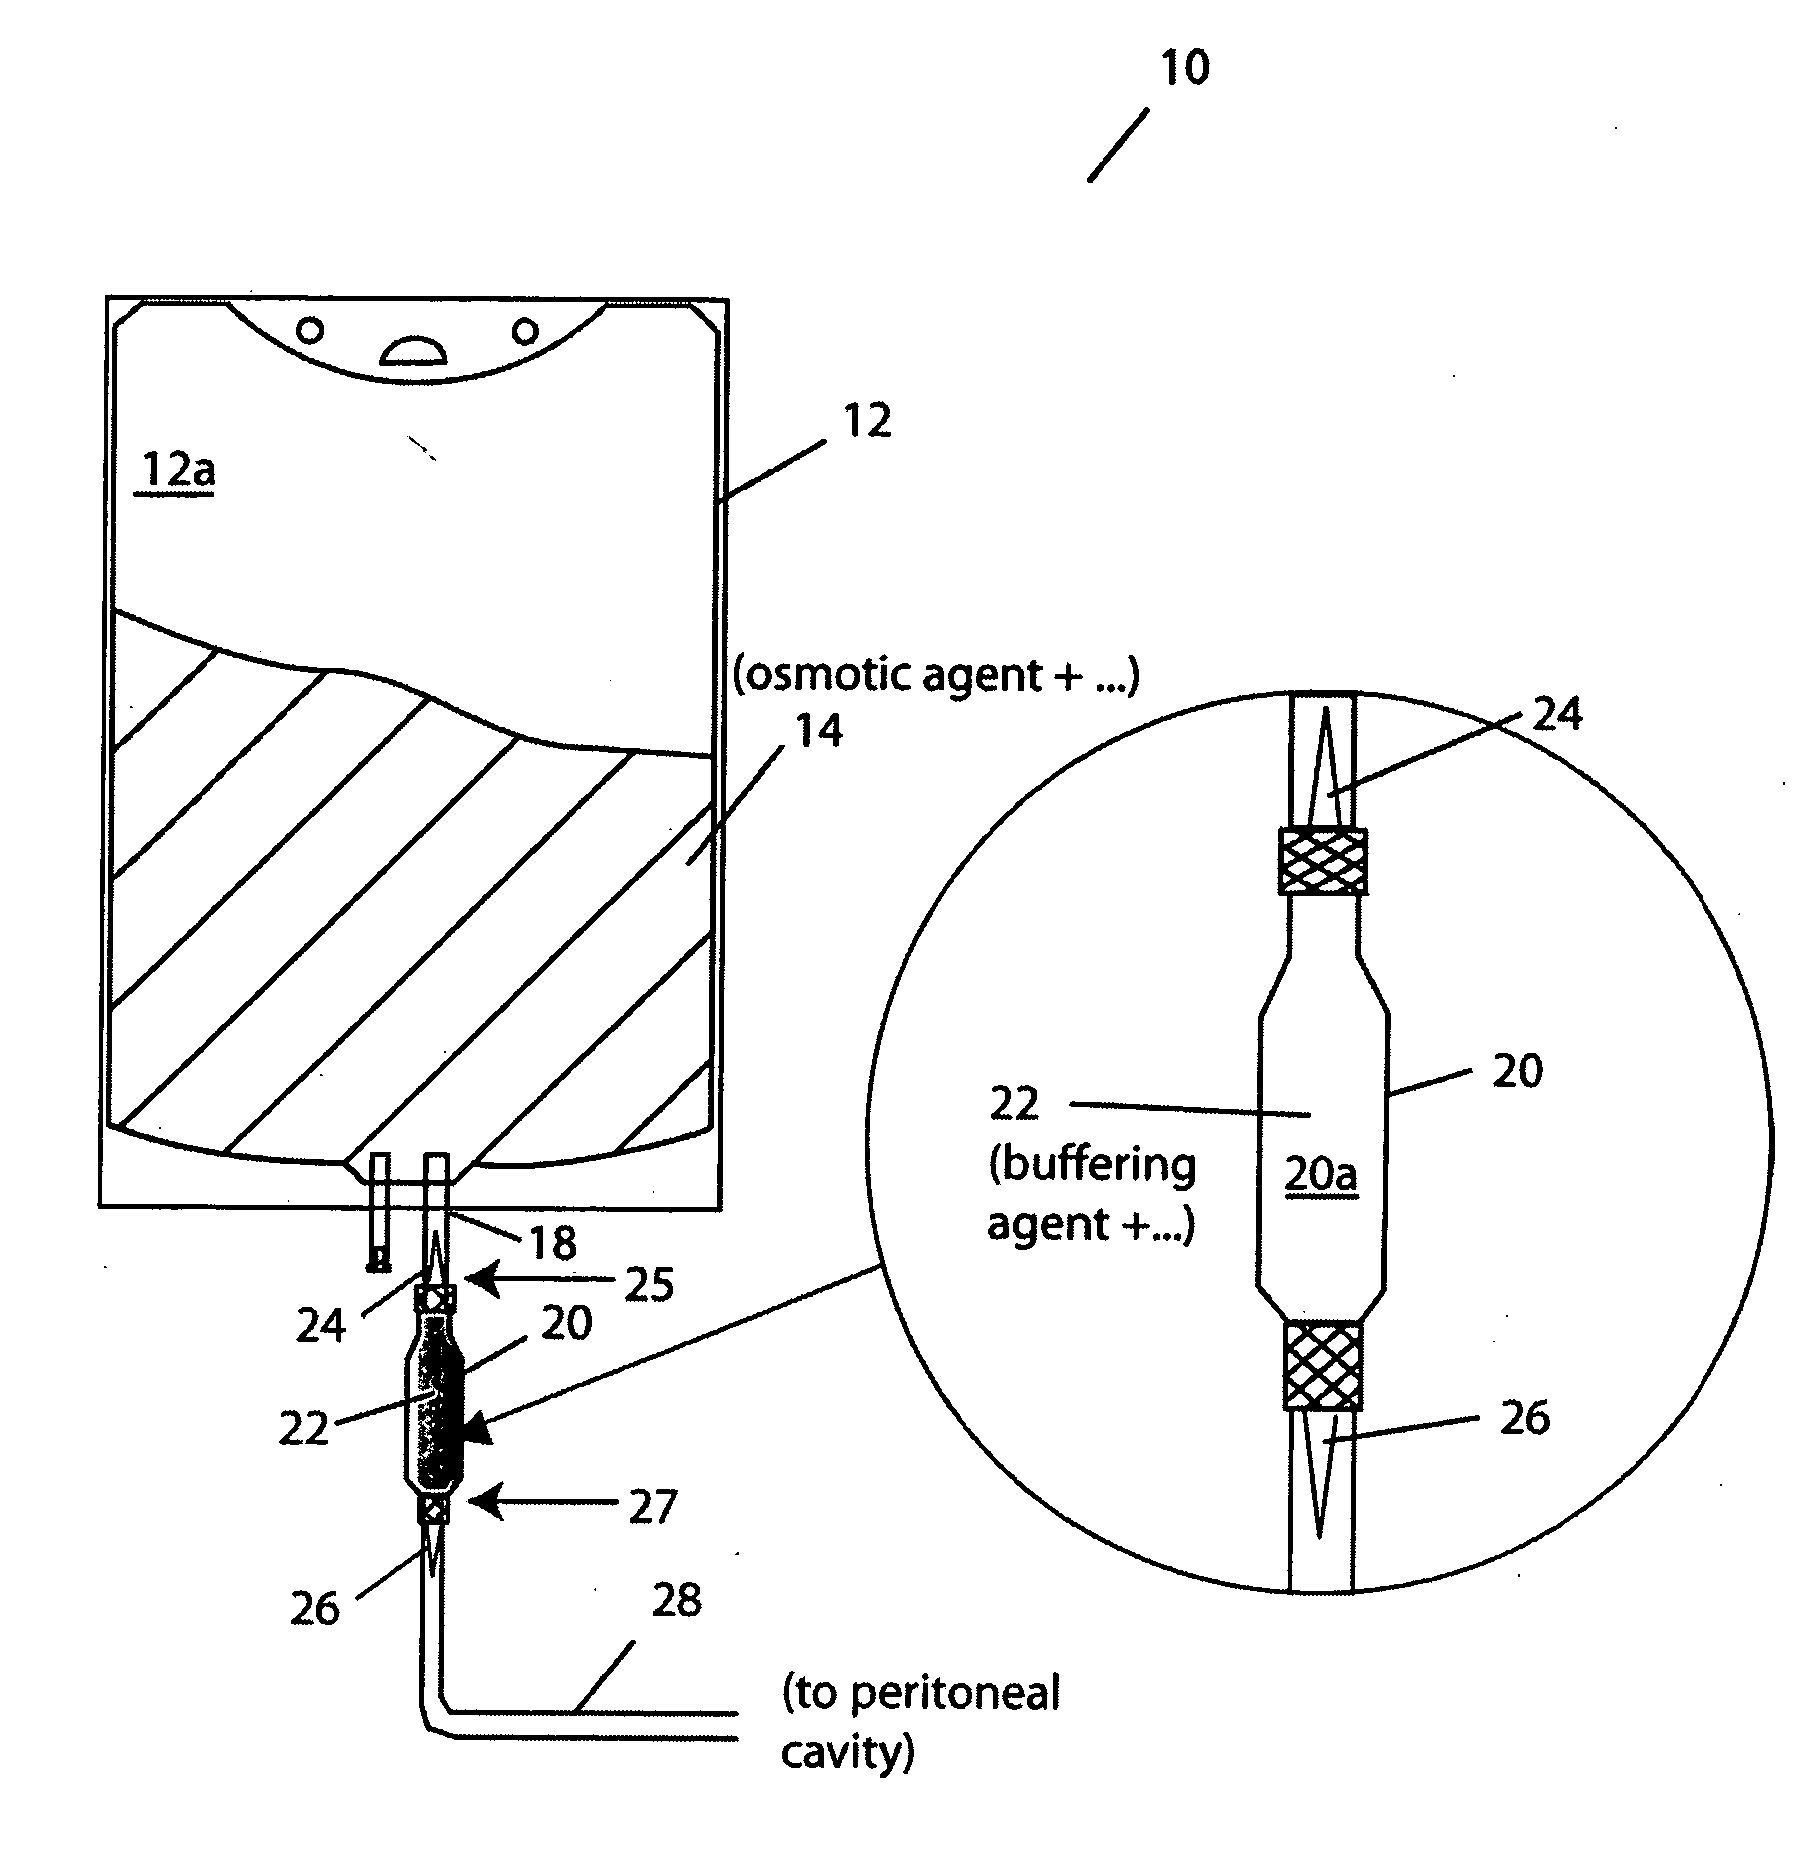 Systems and methods for delivery of peritoneal dialysis (PD) solutions